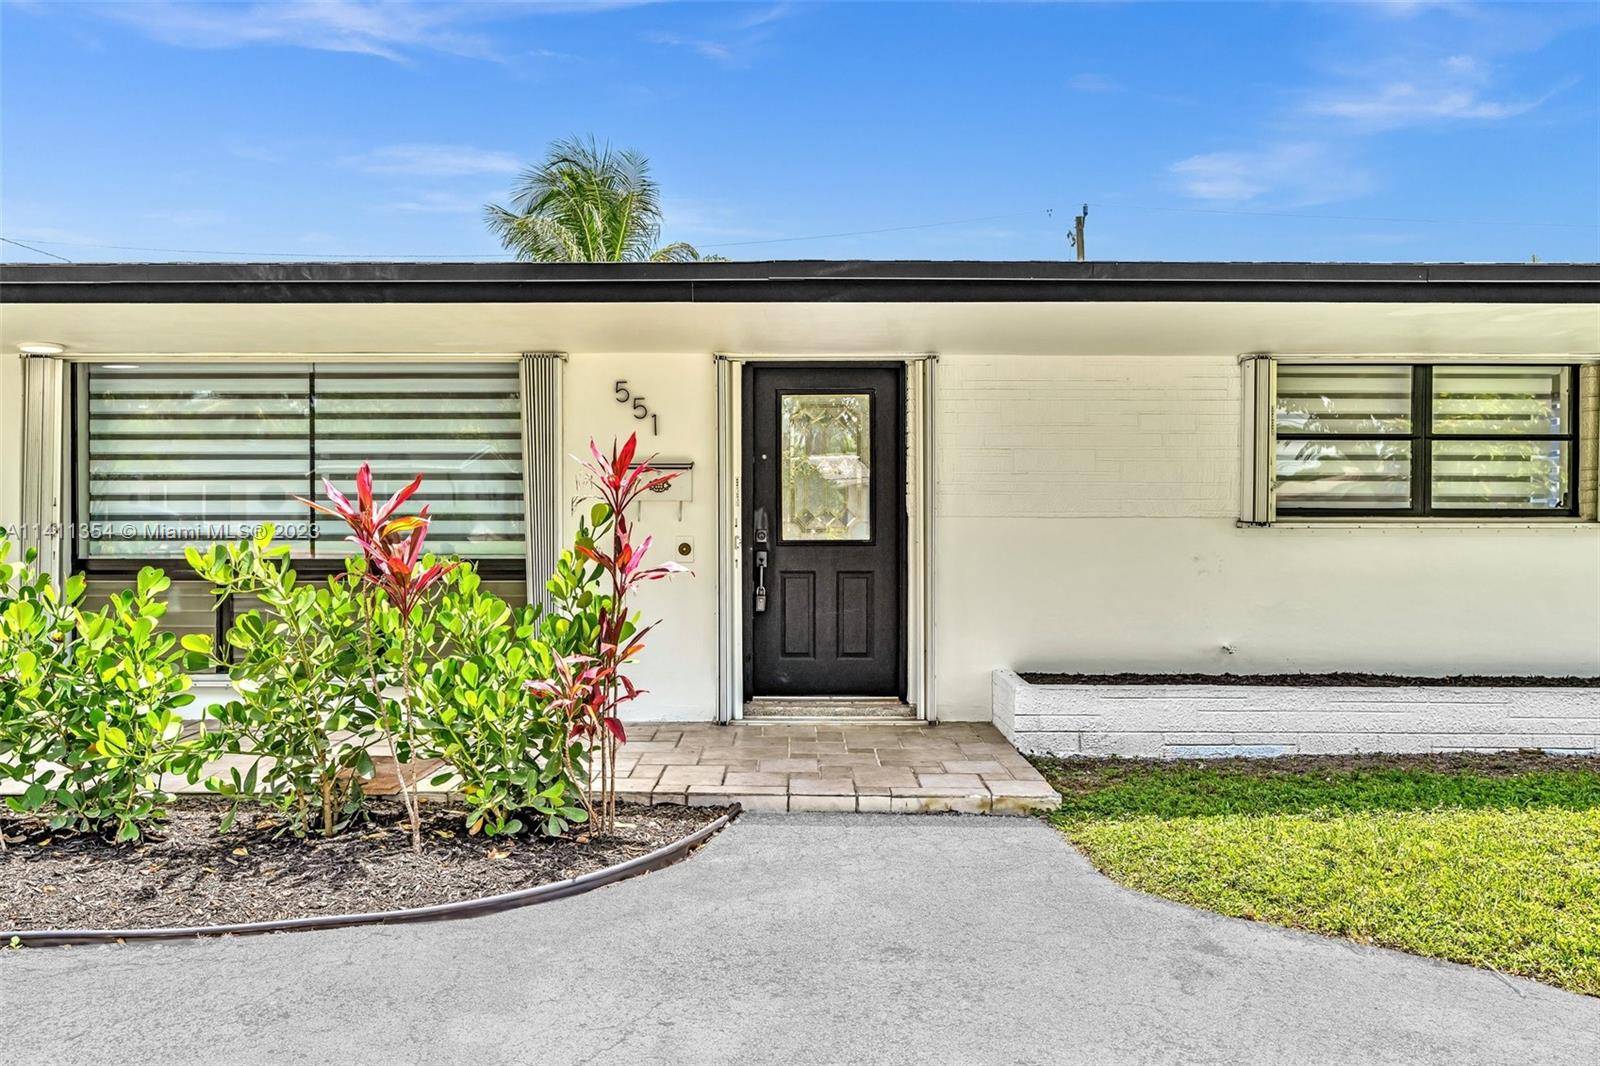 Welcome to 551 S Crescent Dr, Hollywood, FL 33021 7501, a fully renovated and modern single family home.